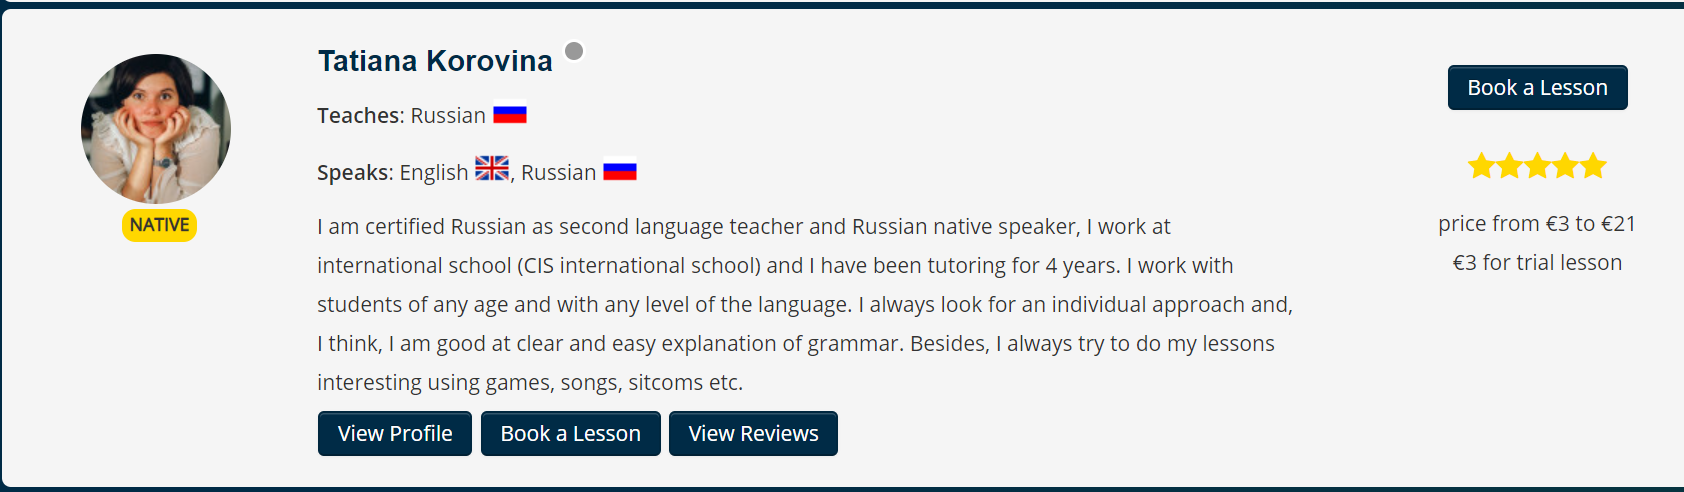 Russian language tutor online. Learn Russian fast with the best Russian native tutors at Lonet.Academy